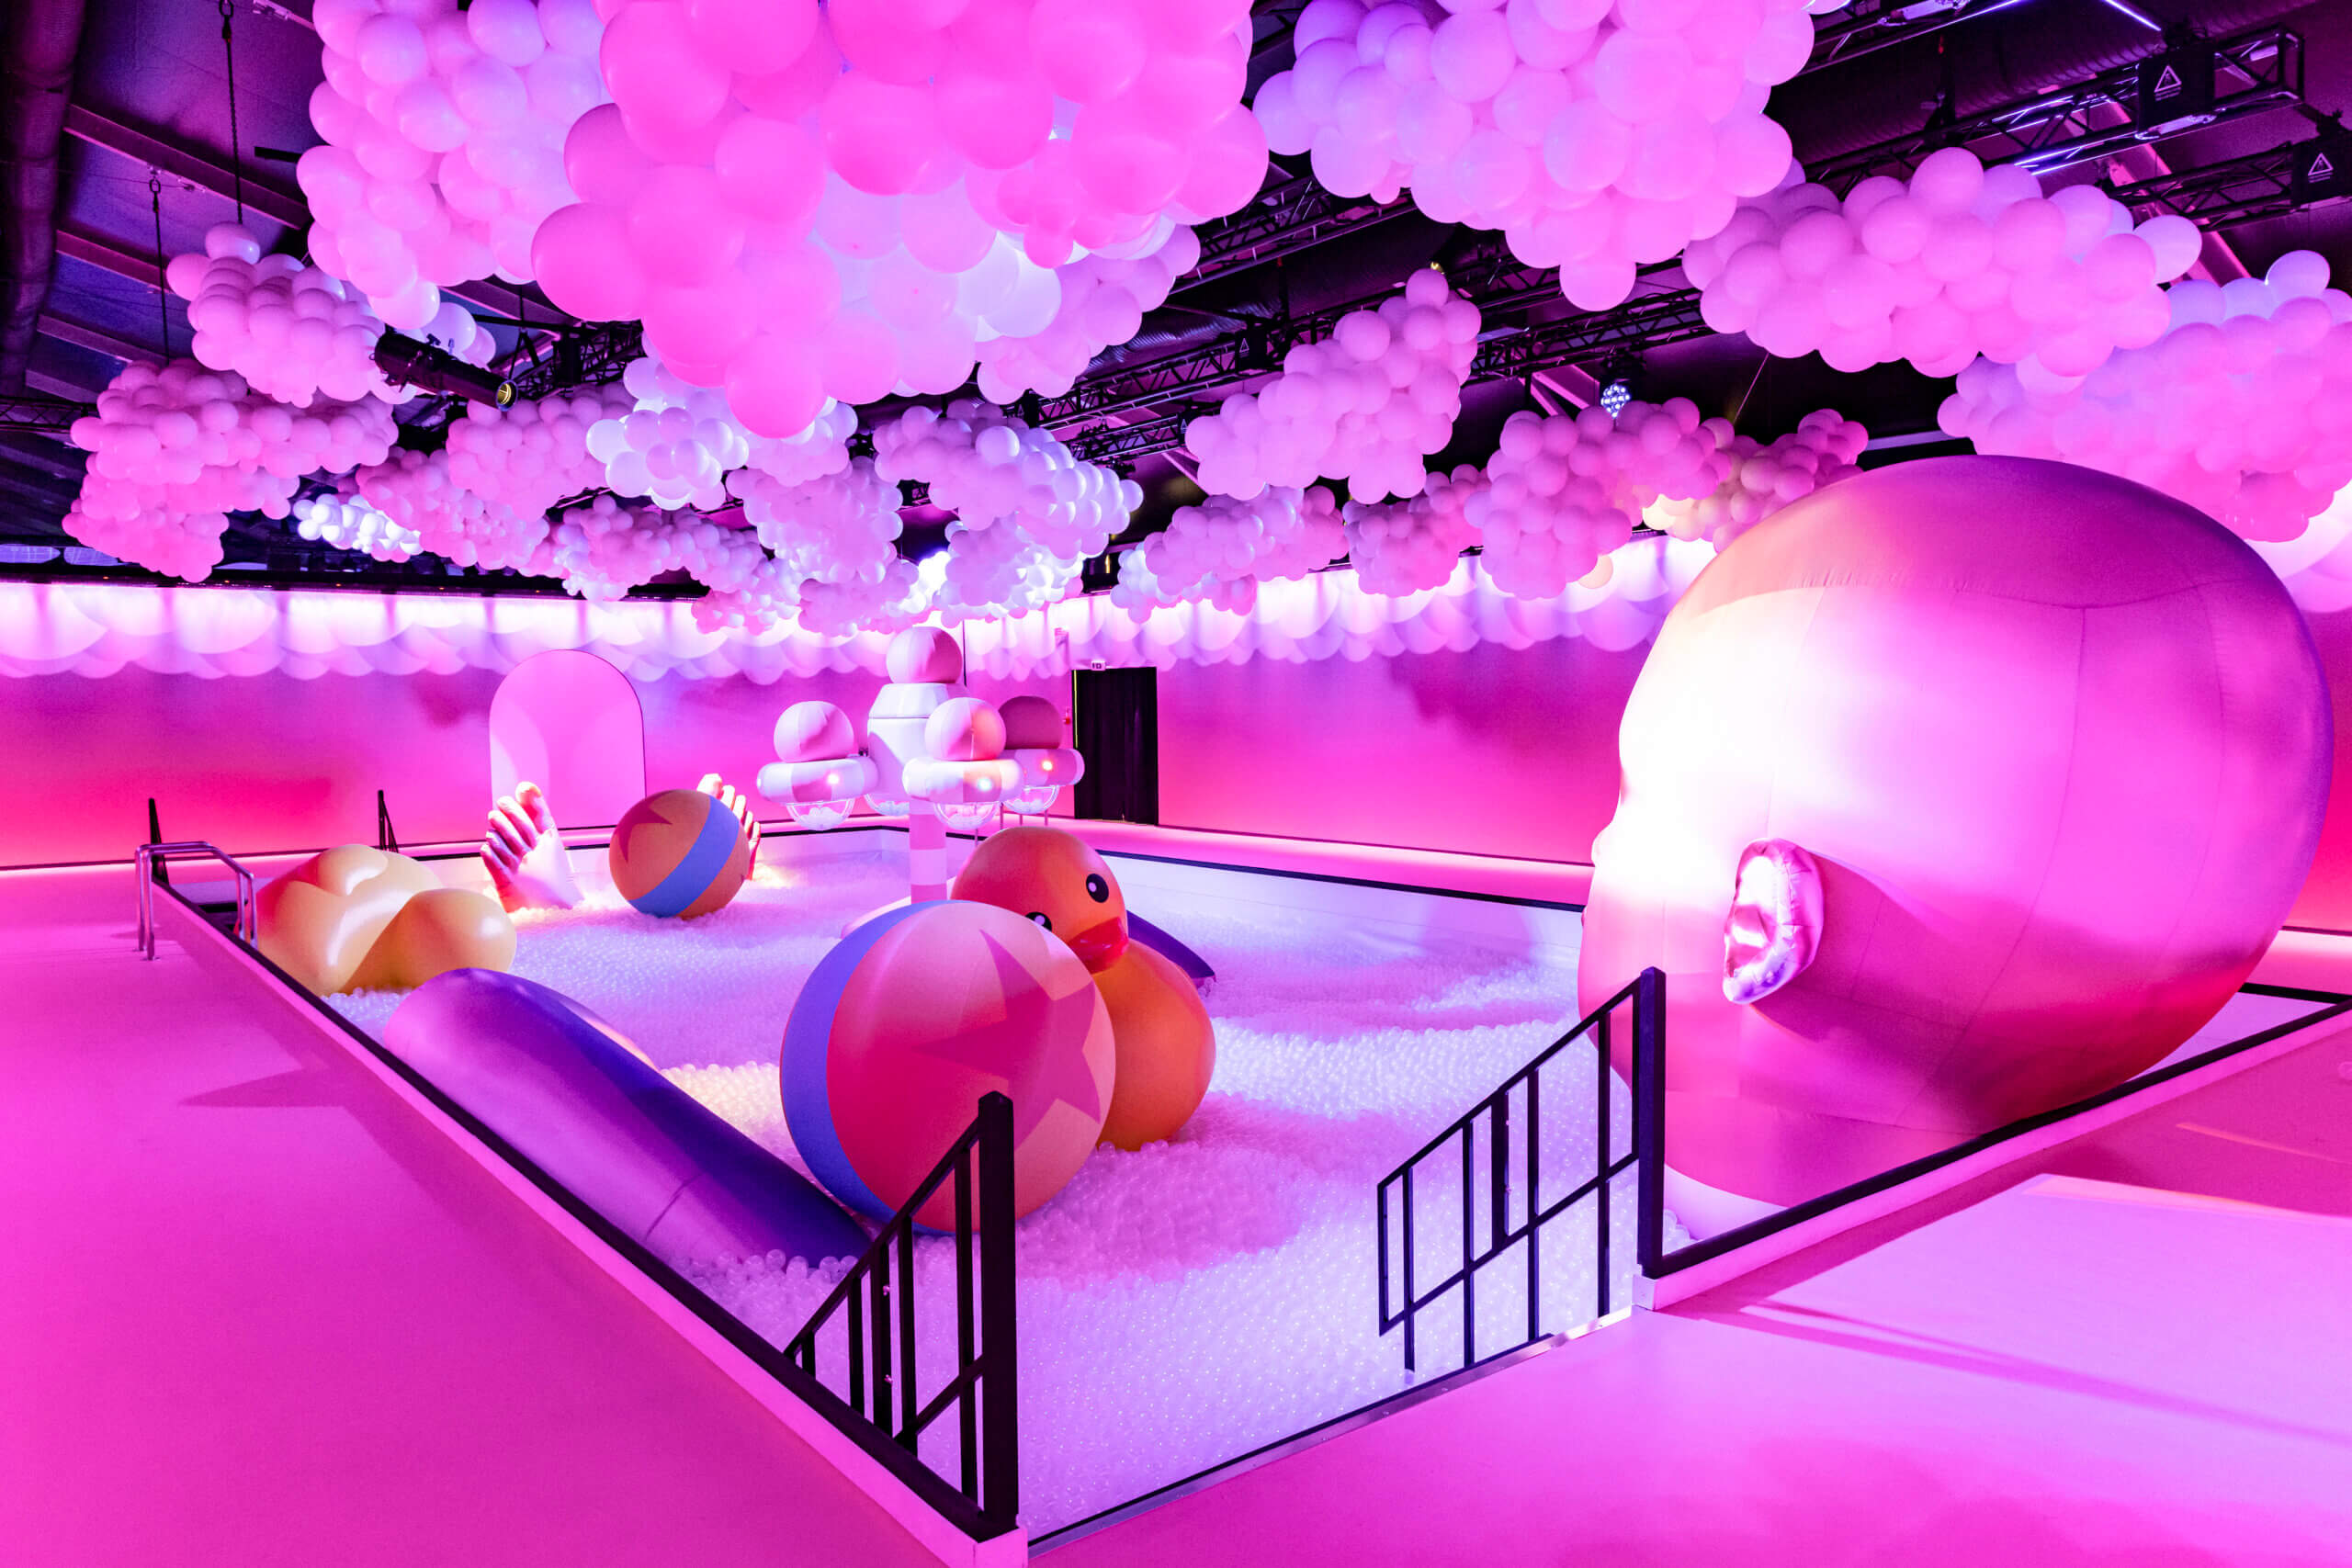 Bubble World An Immersive Experience comes to Los Angeles this June